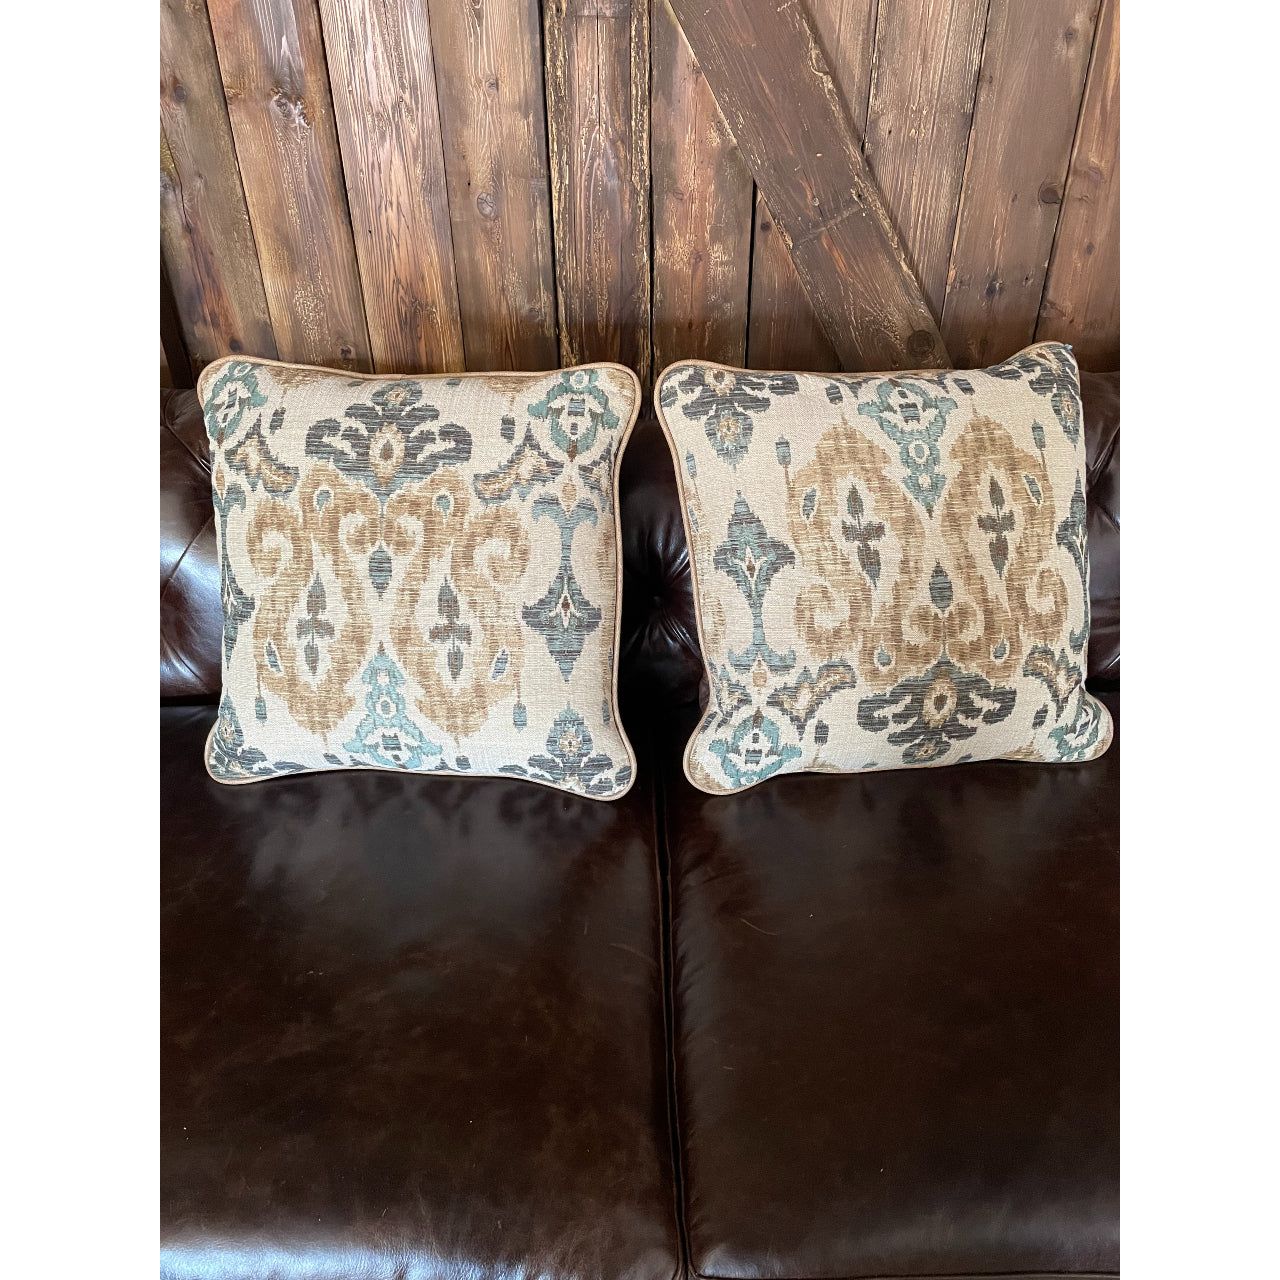 Leather & Fabric Pillow Pair #12 & 13